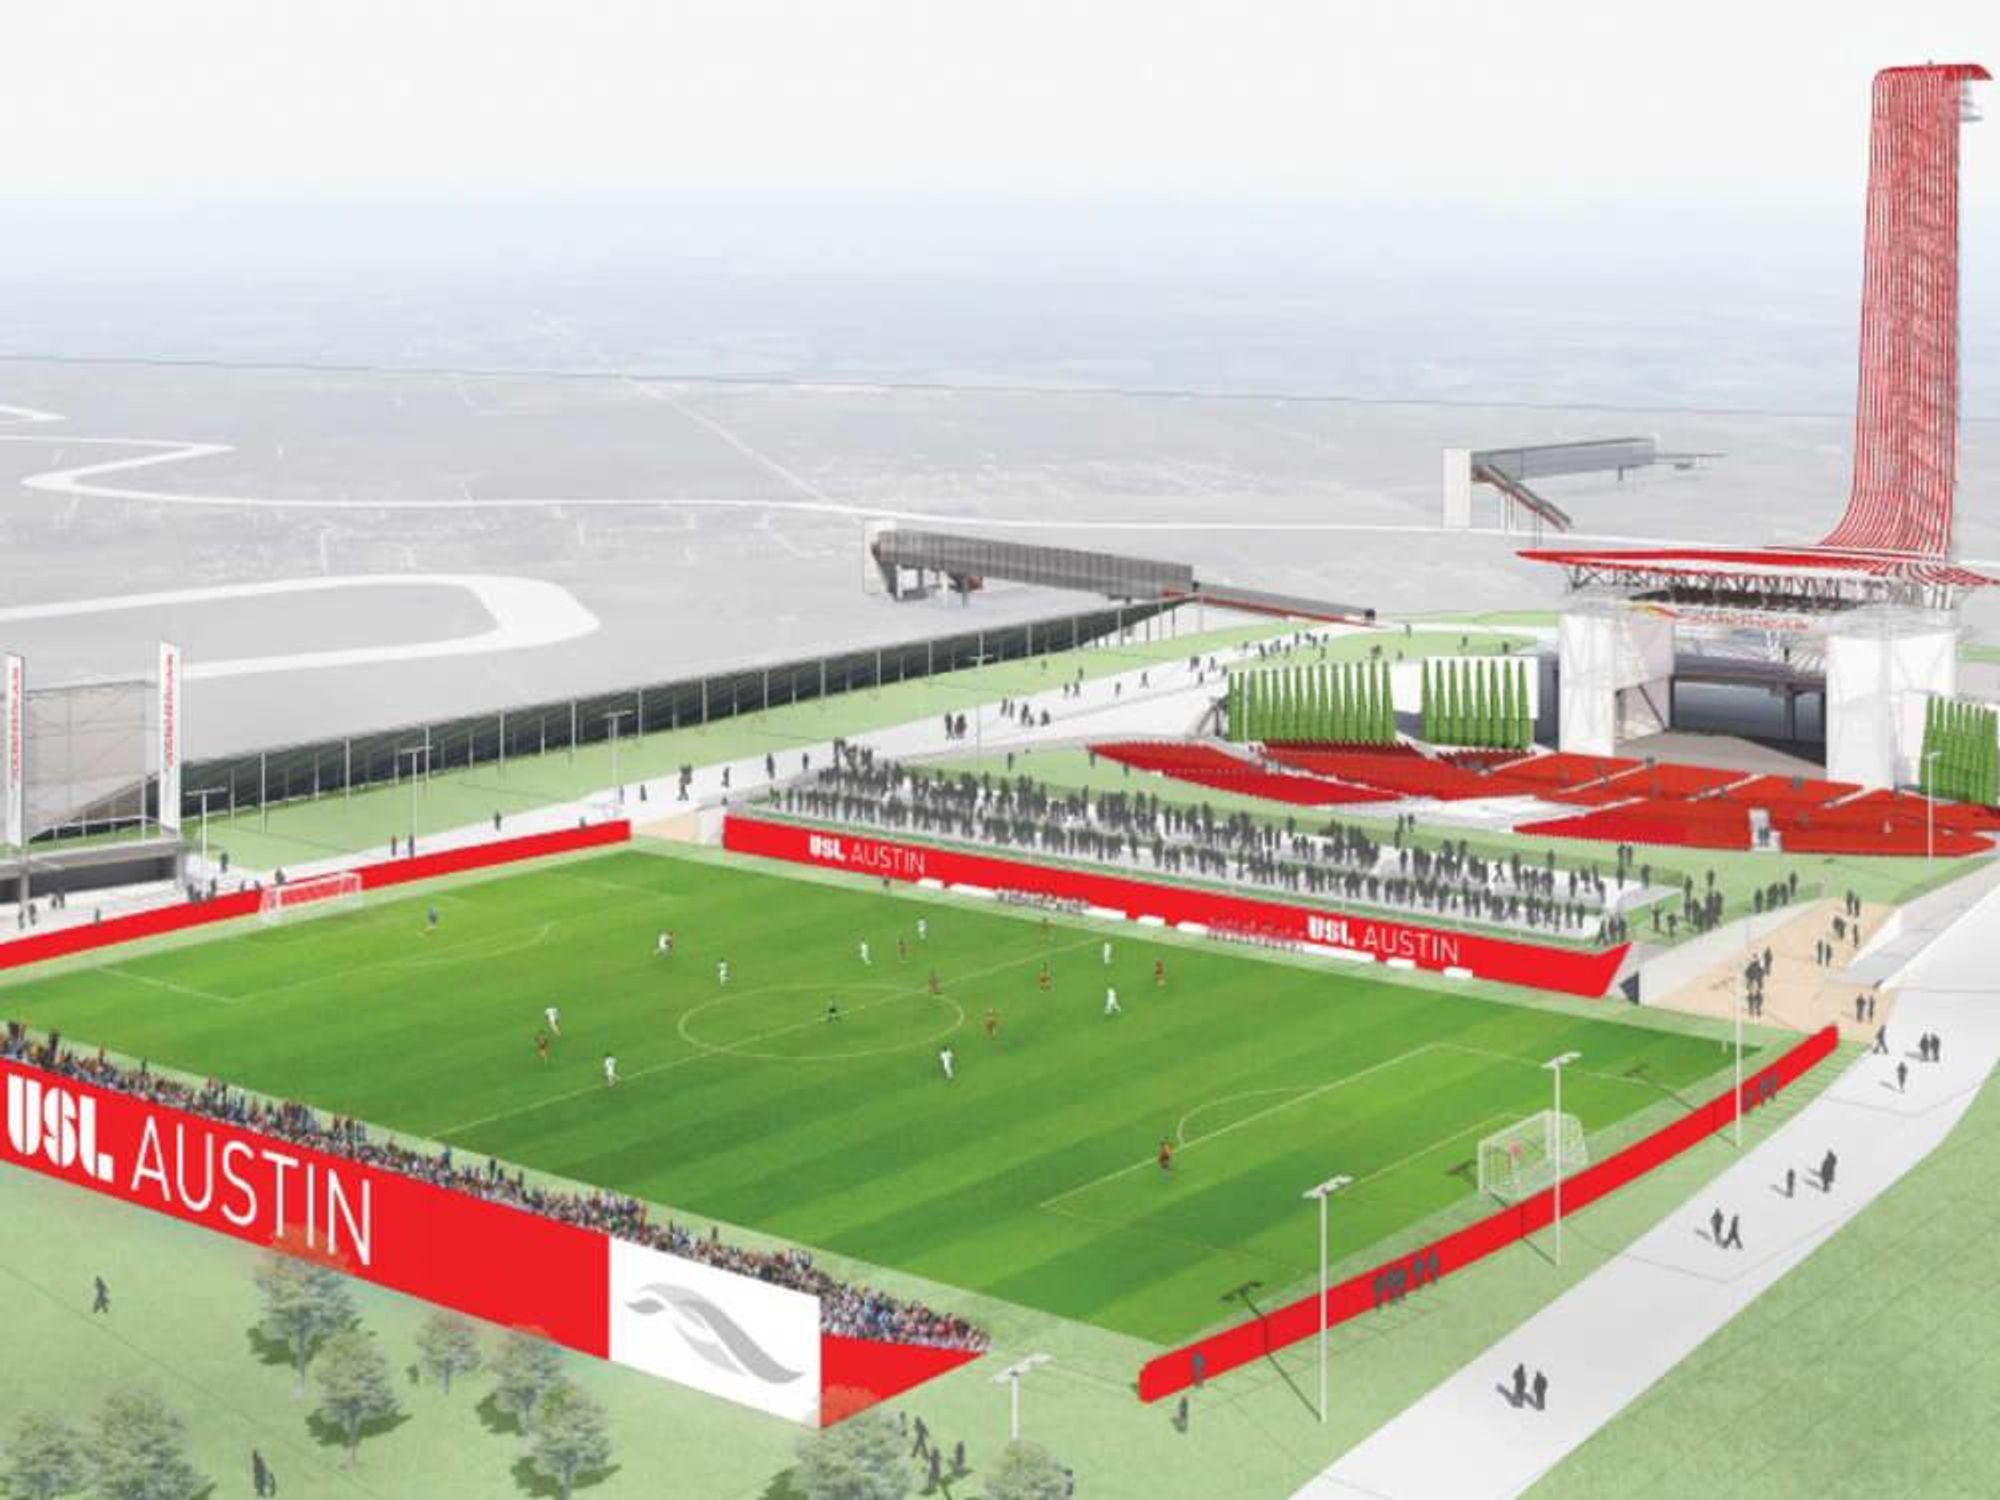 ThUnited Soccer League Circuit of The Americas filed rendering